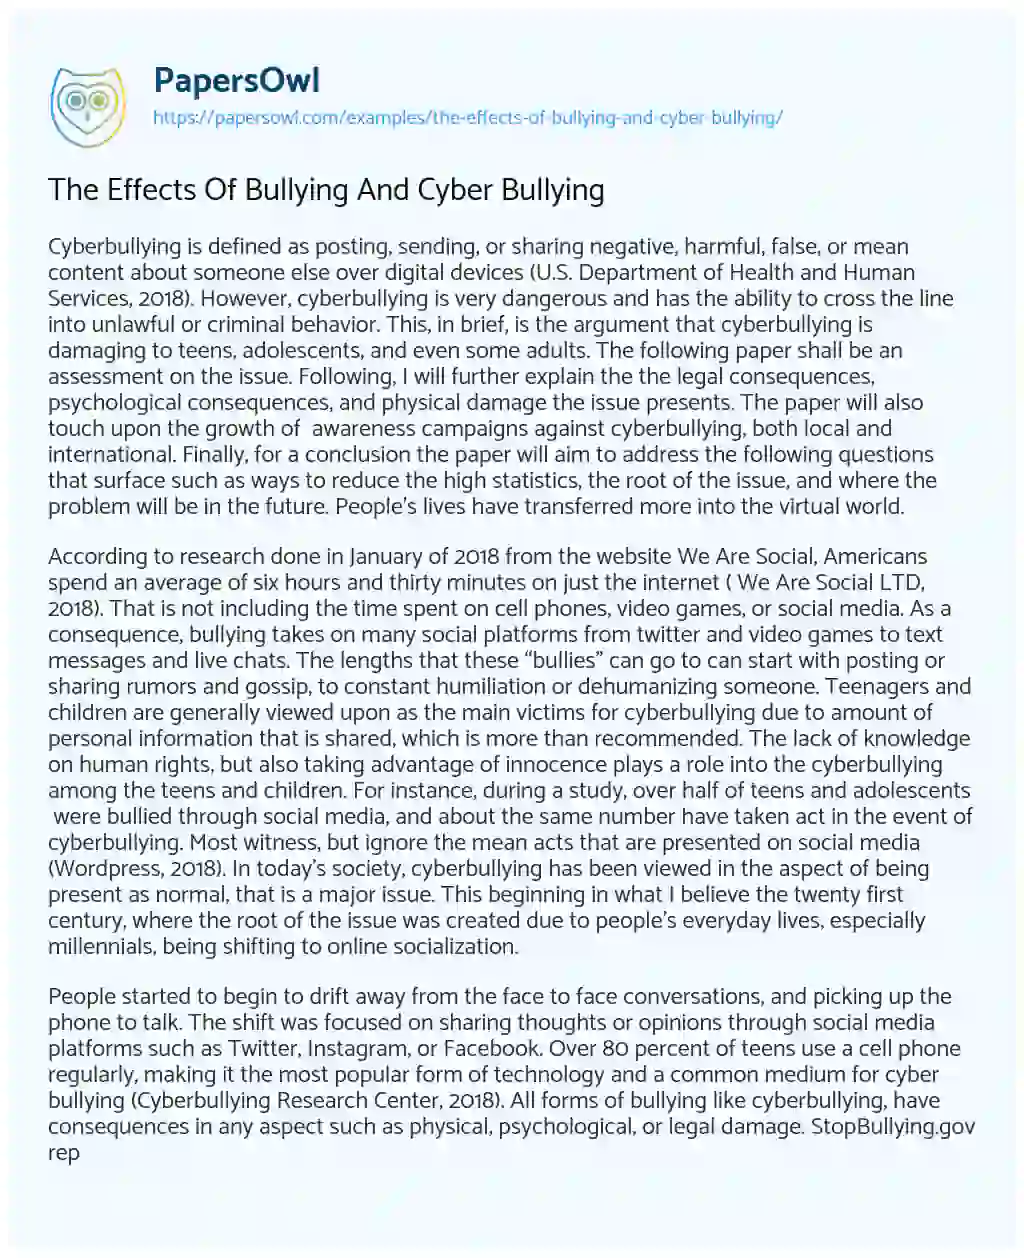 The Effects of Bullying and Cyber Bullying essay